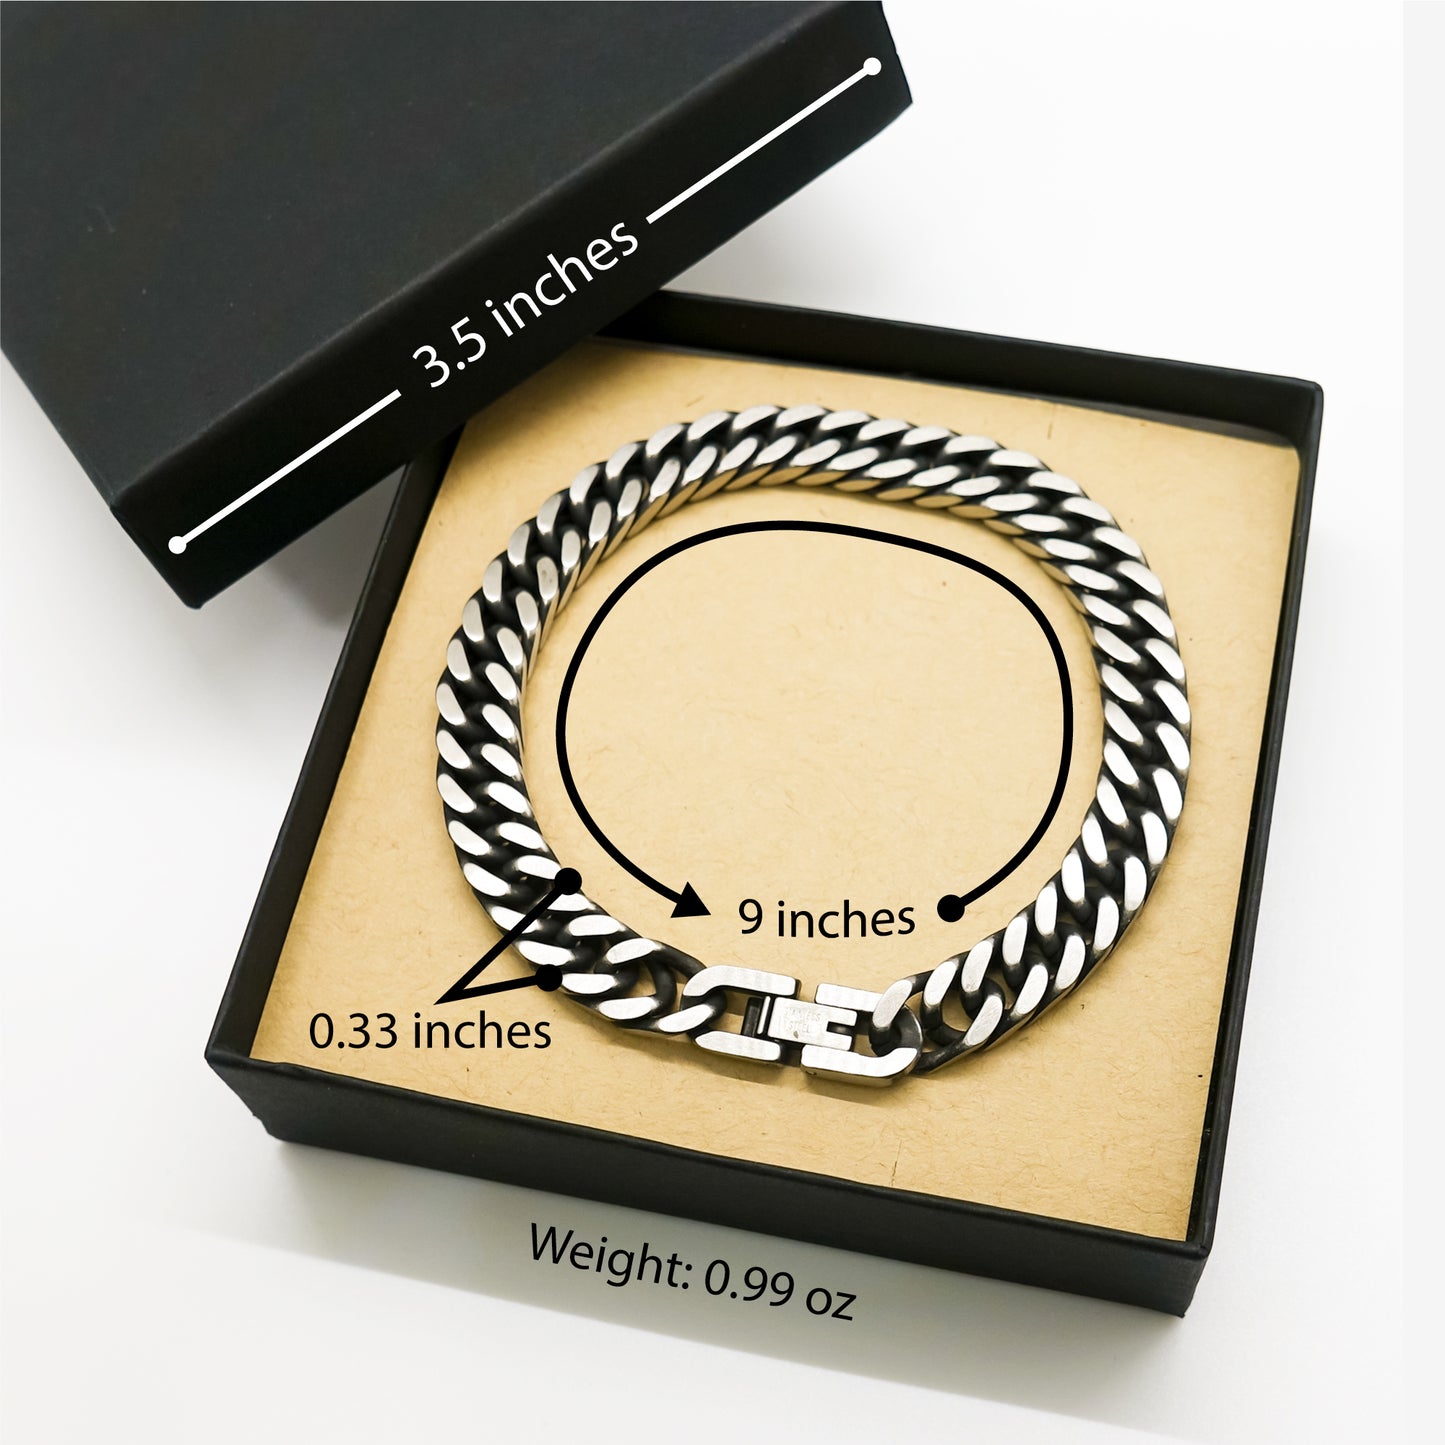 Ouma Cuban Link Chain Bracelet | Engraved Special Place in Heart | Unique Gift for Birthday, Christmas, and Graduation | Ouma You will Always Have a Special Place in My Heart